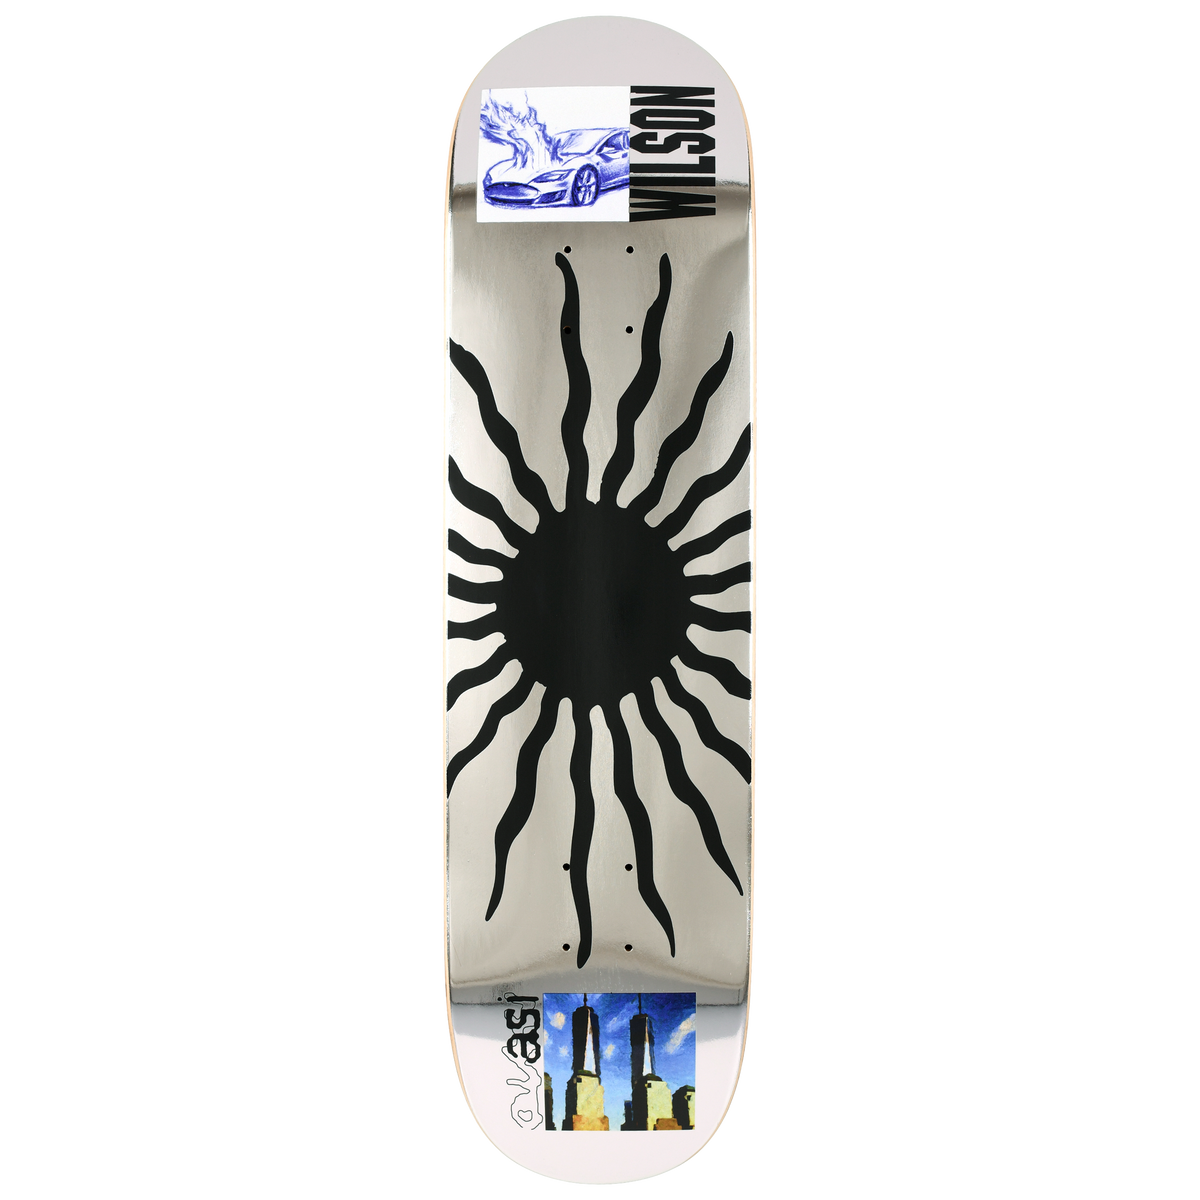 Quasi deck with metallic silver finish and drawn bright colored images with middle black sun graphic.